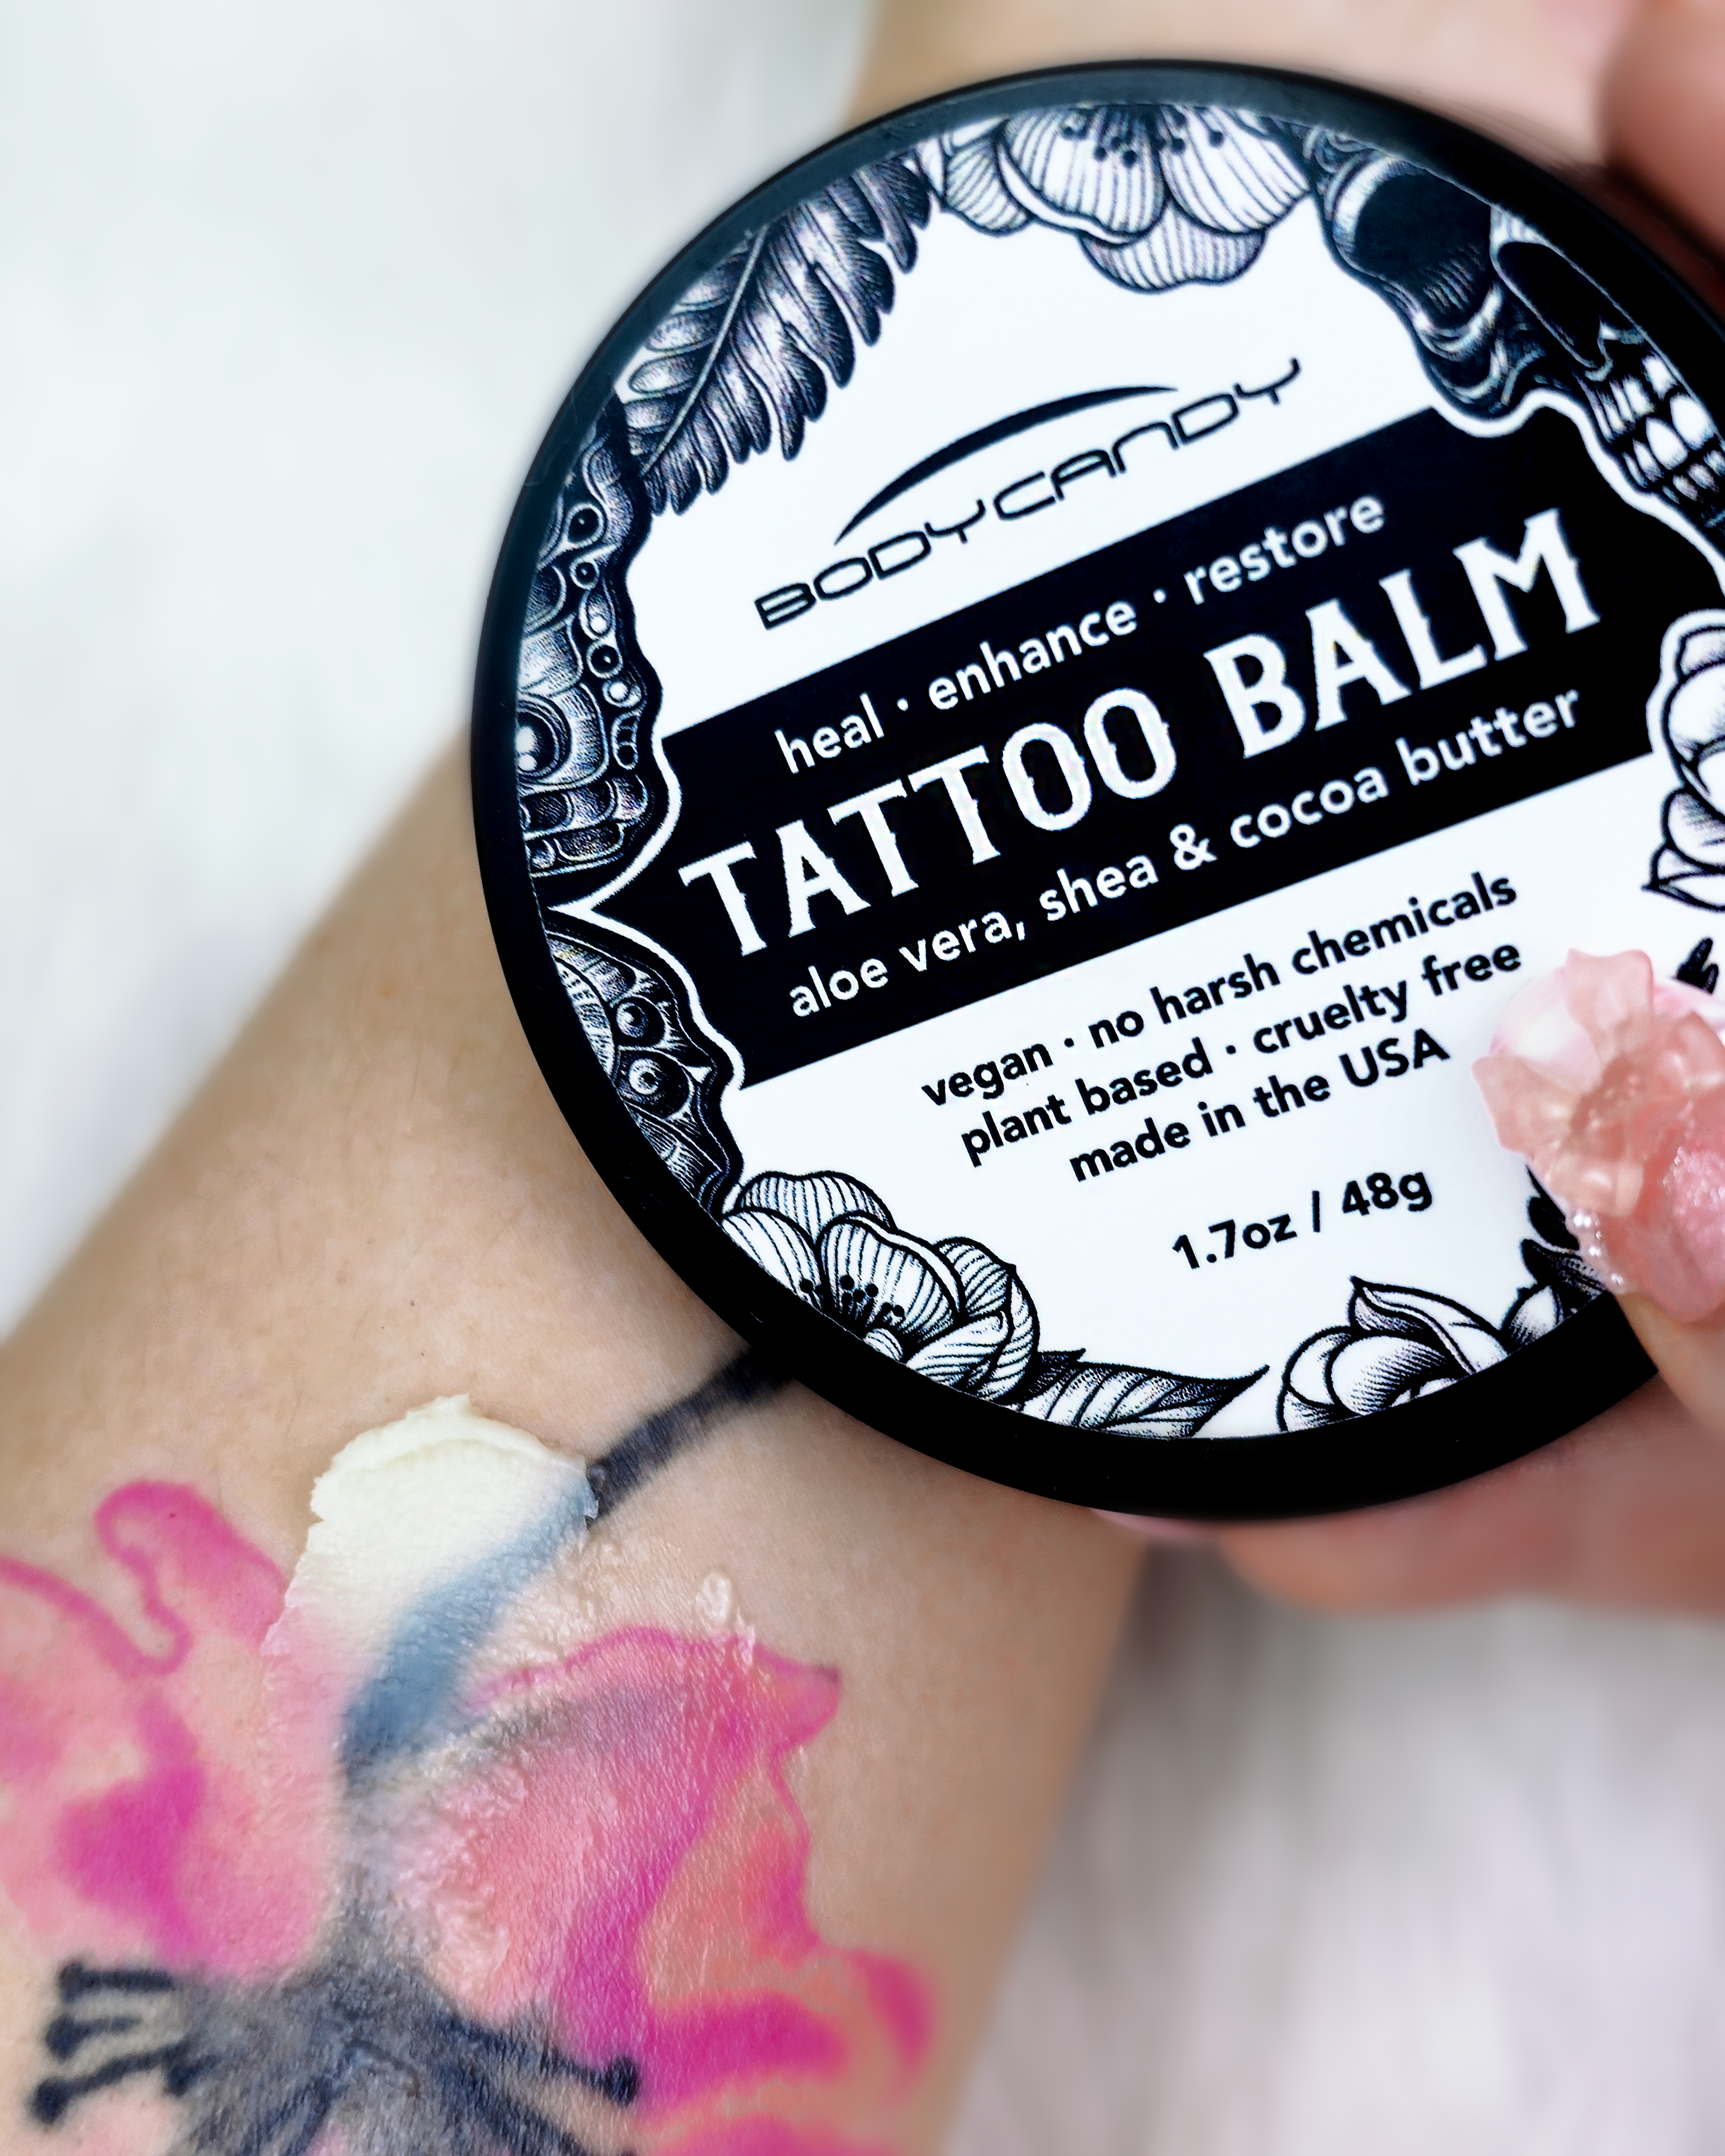 Body Candy Tattoo Aftercare Tattoo Balm